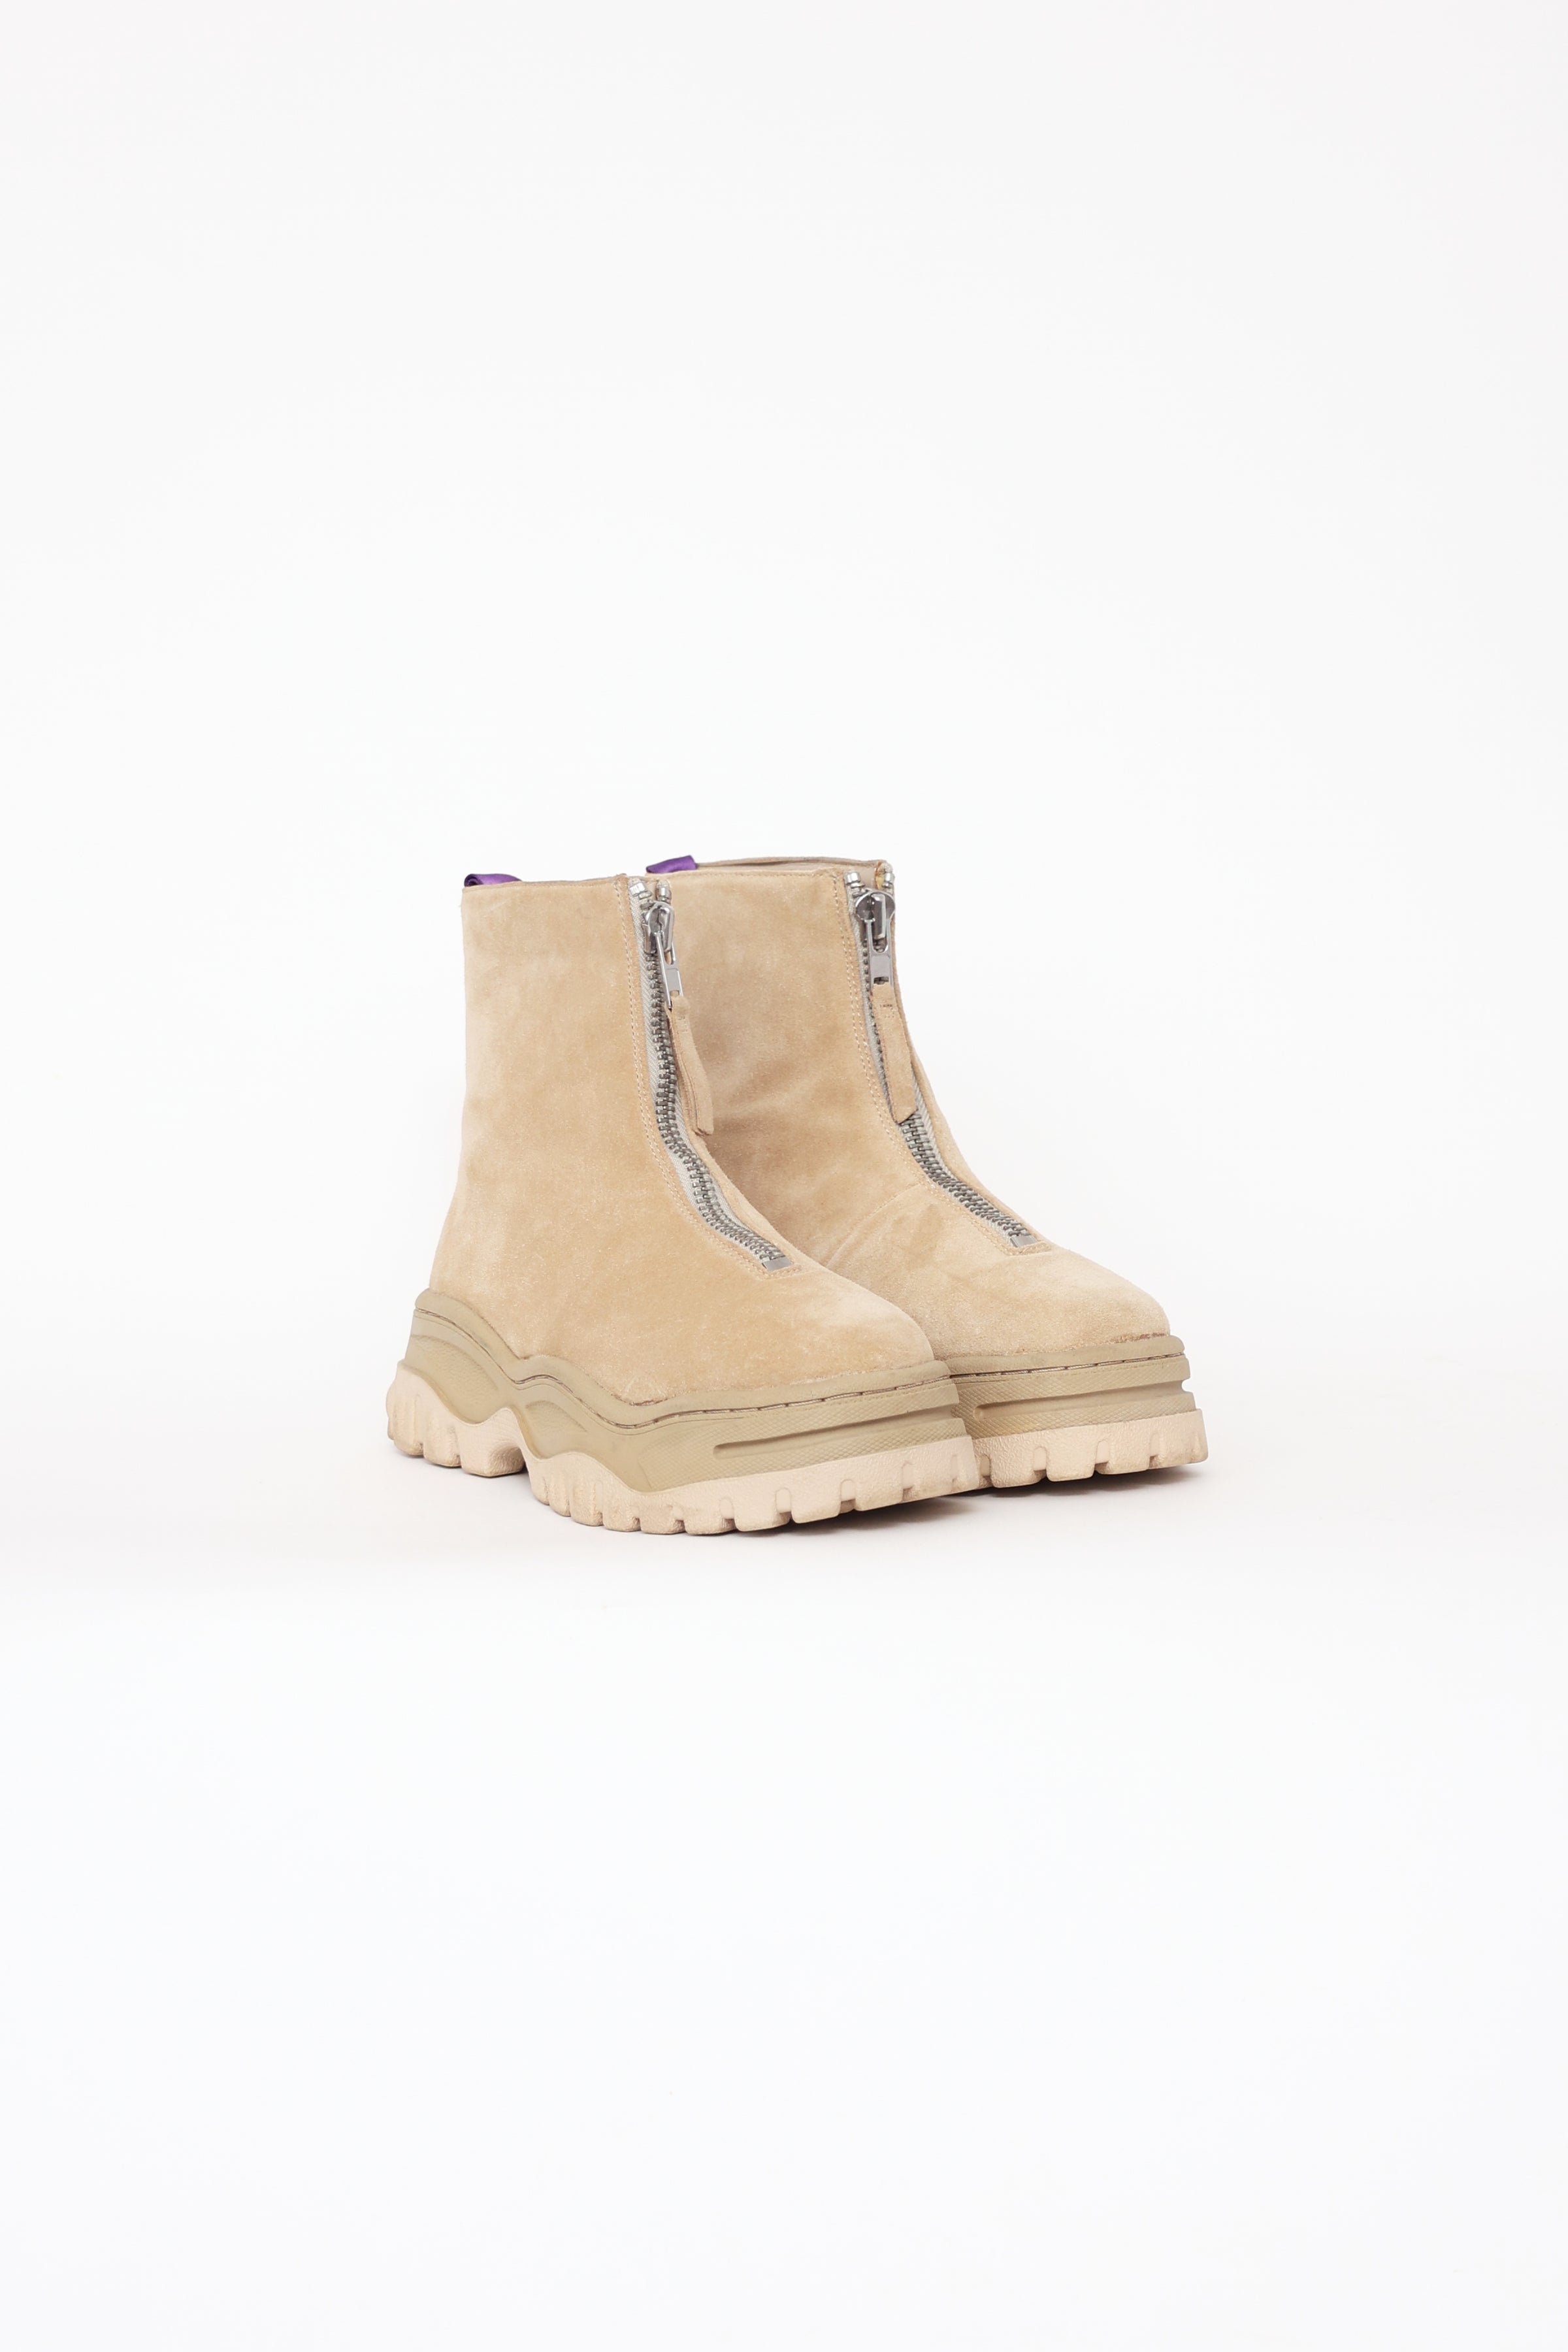 Eytys // Beige Suede Raven Chunky Boots – VSP Consignment